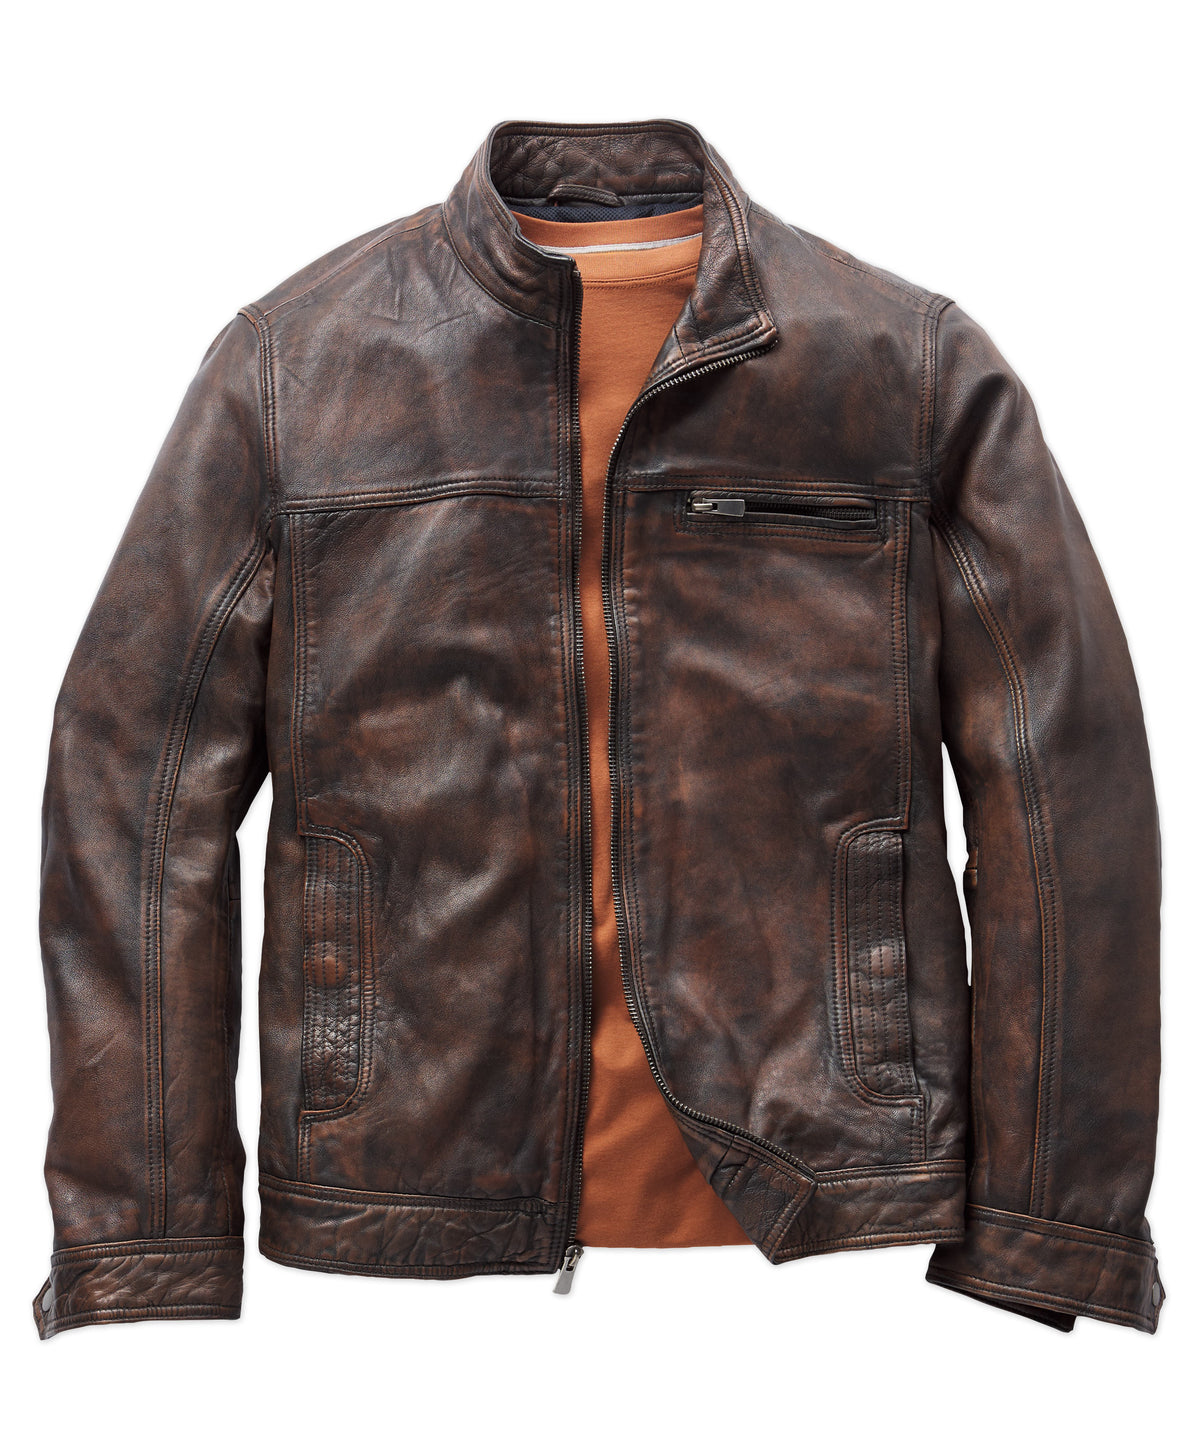 Leather Bomber Jacket with Highlighted Seams